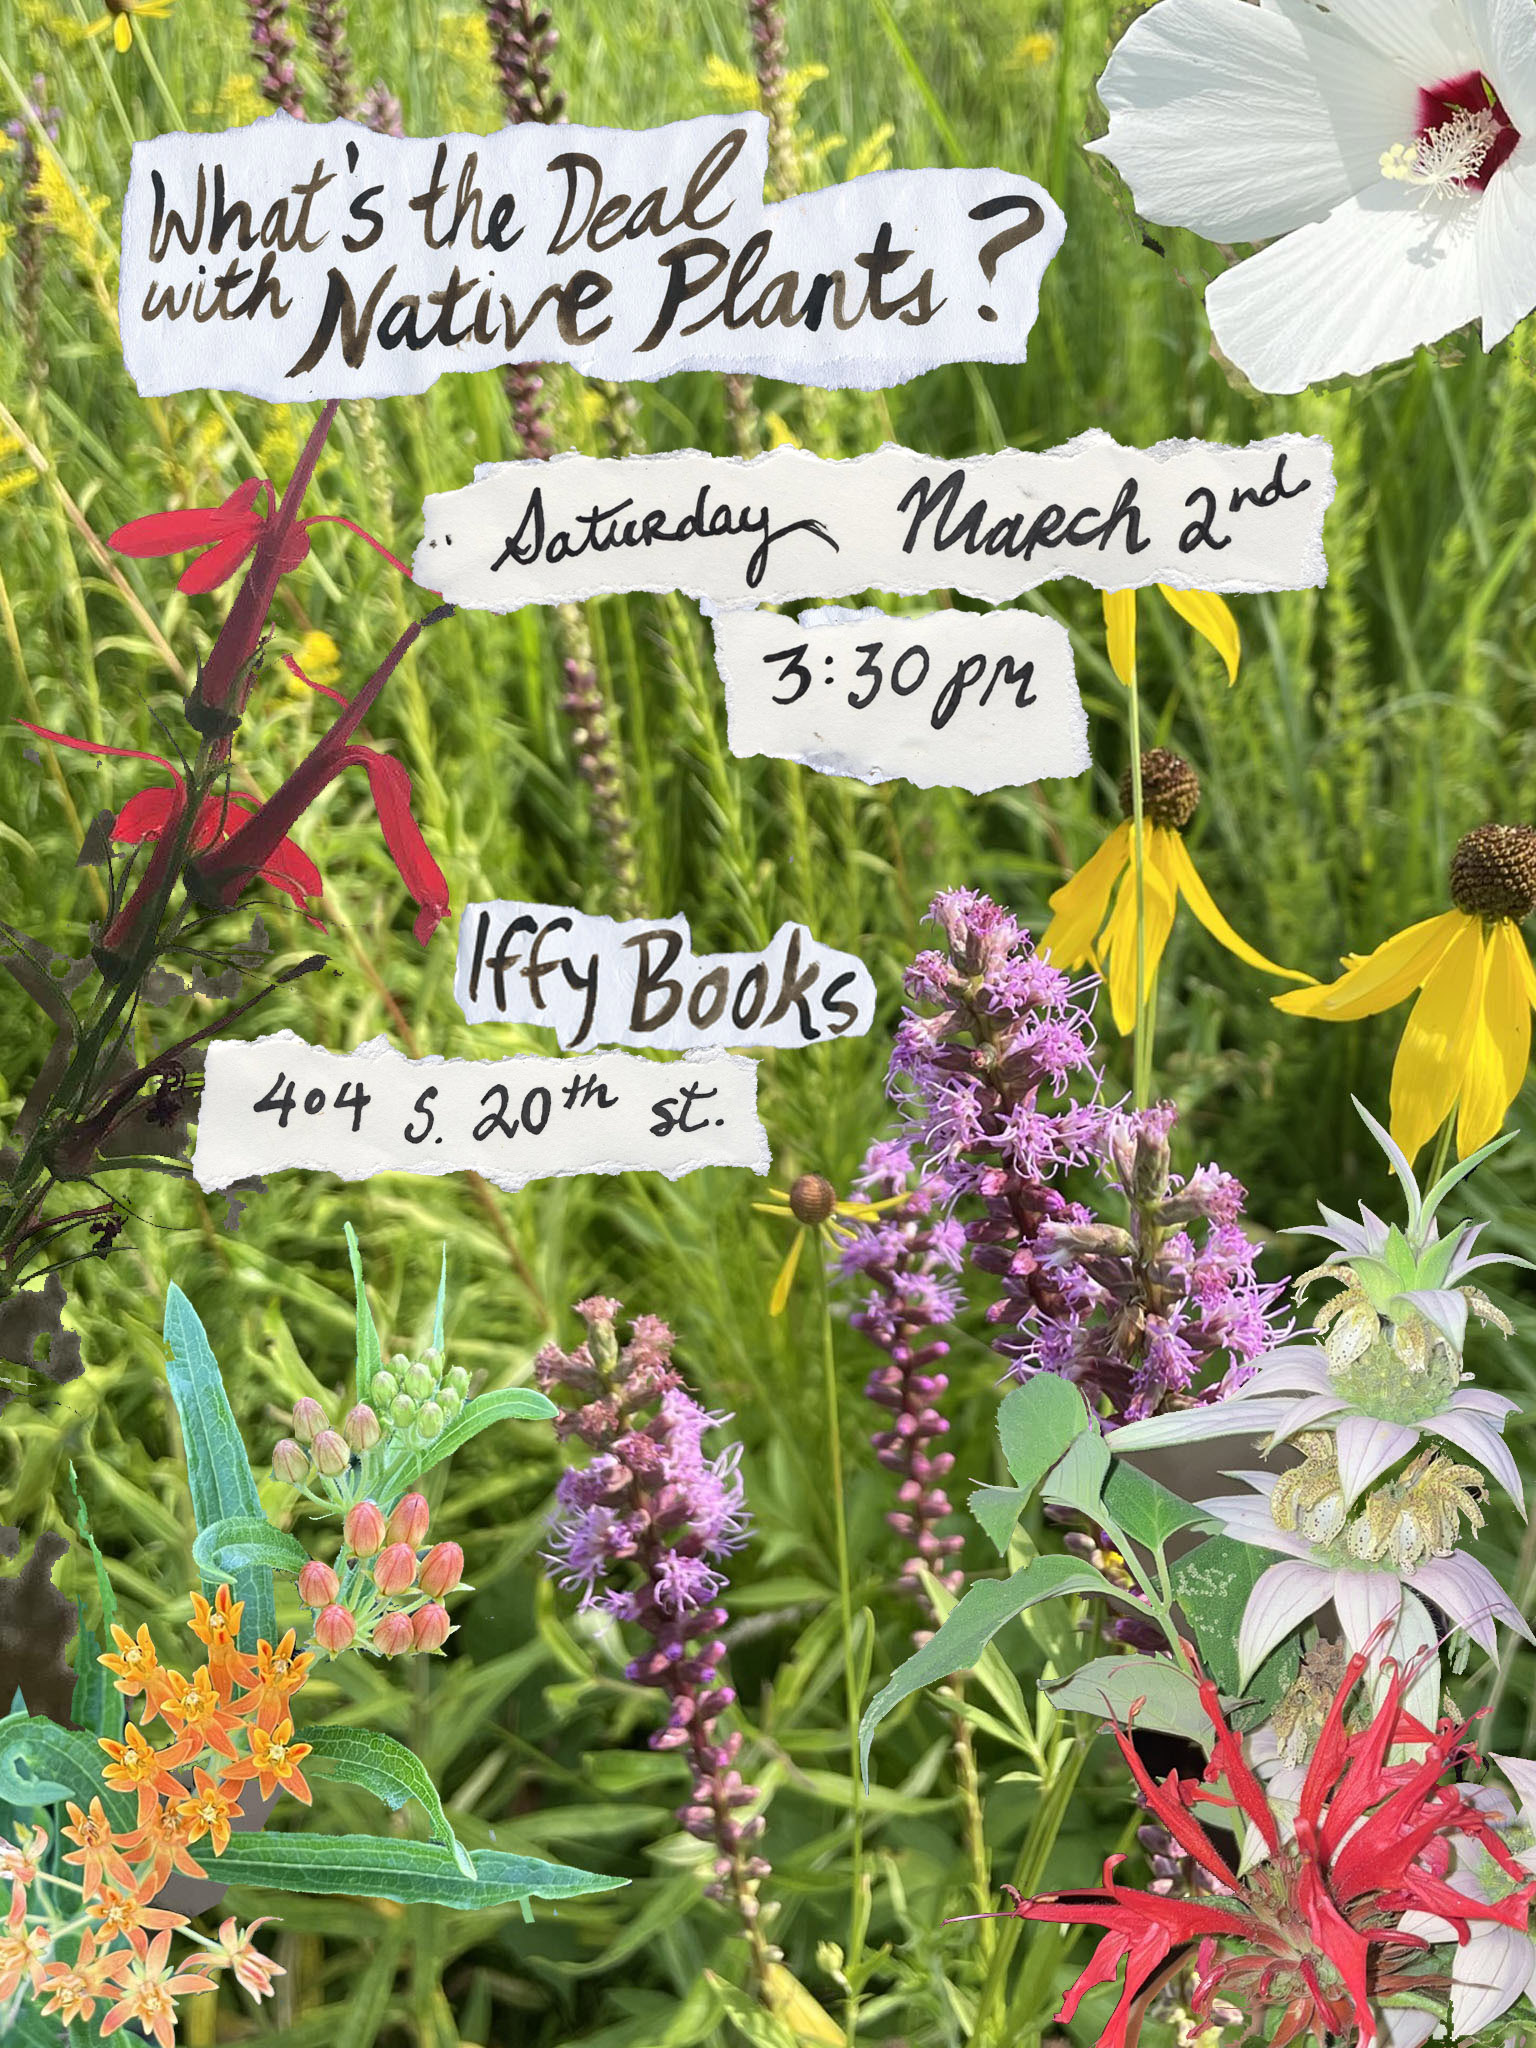 Flyer with a collage of native flowers and the following text handwritten using black walnut ink: What's the Deal with Native Plants? / Saturday, March 2nd / 3:30 pm / Iffy Books / 404 S. 20th St.